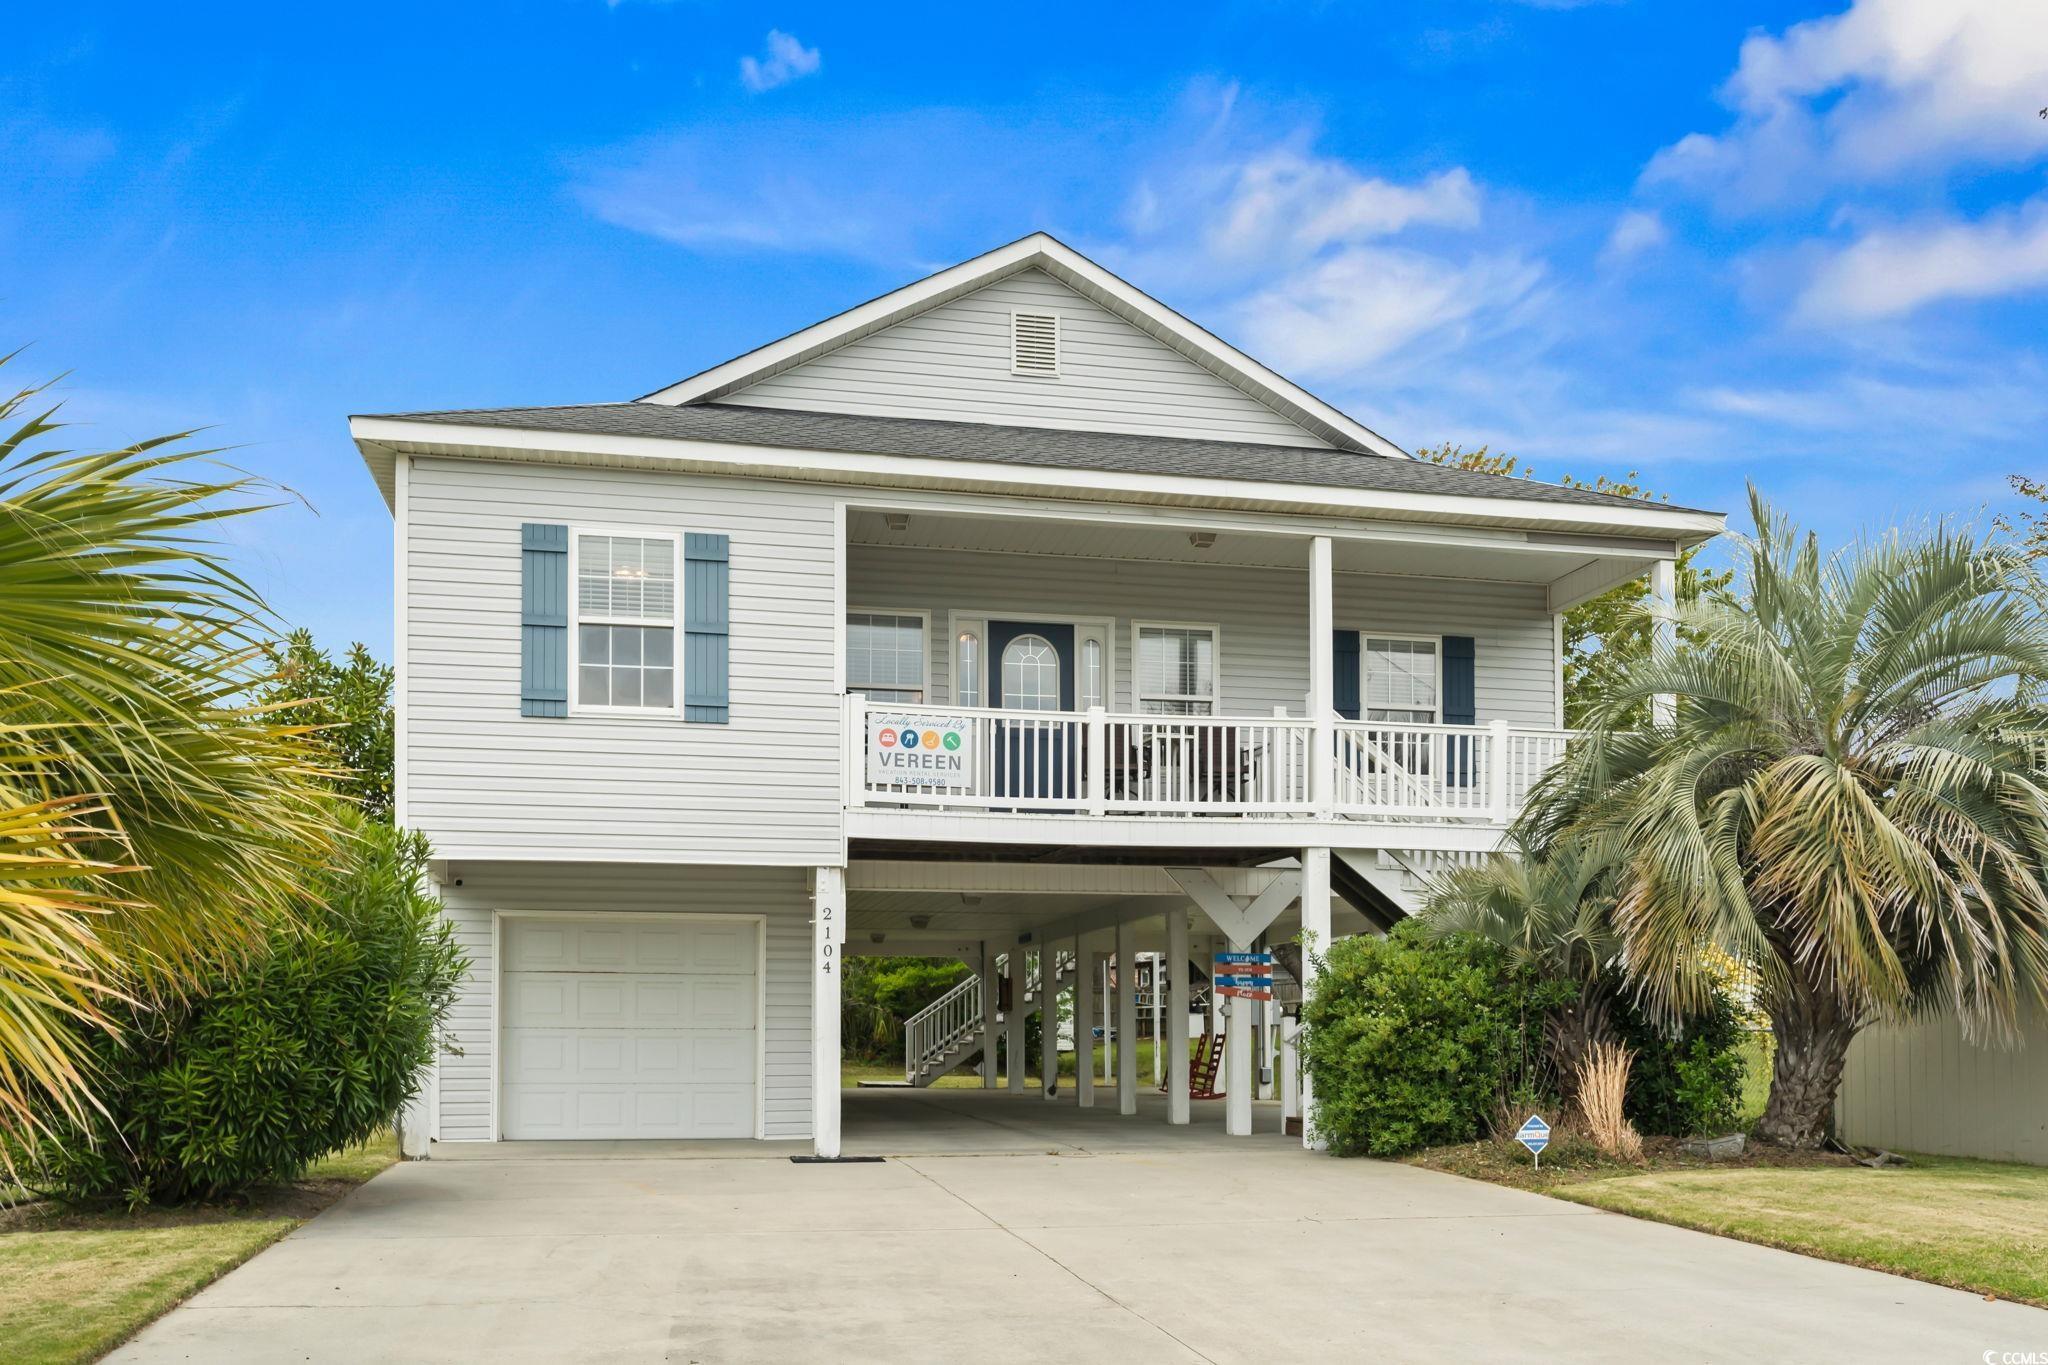 Photo one of 2104 Havens Dr. North Myrtle Beach SC 29582 | MLS 2408775